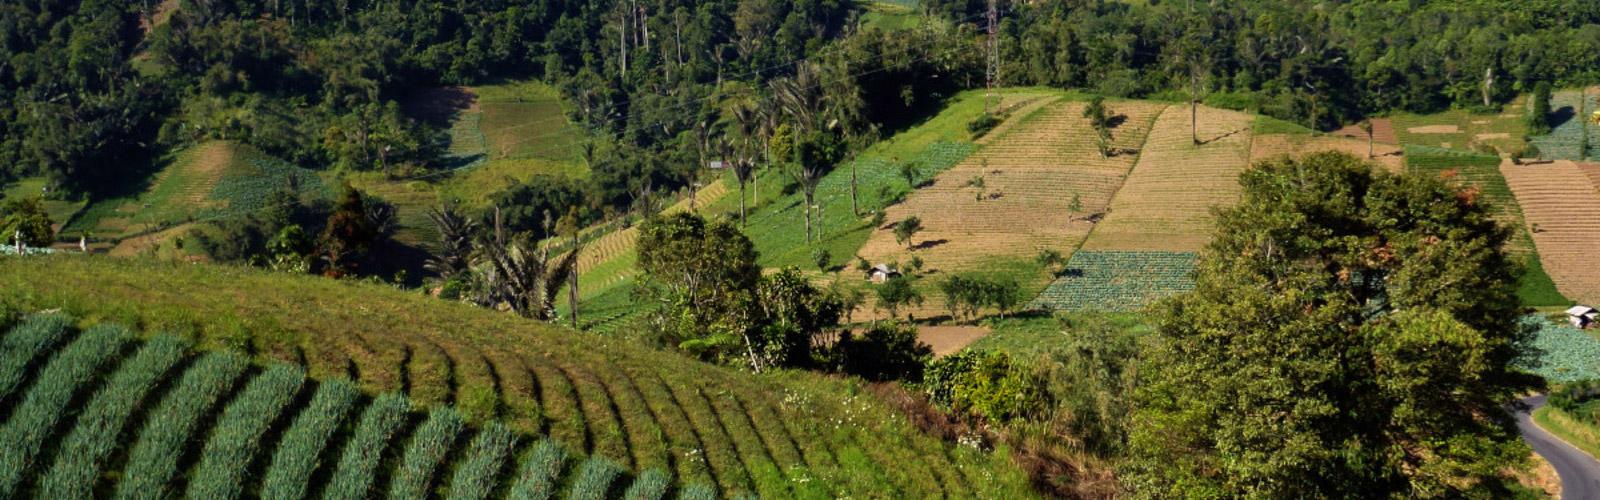 Cultivation on the slopes of Empung volcano in Sulawesi.  B. Locatelli © CIRAD